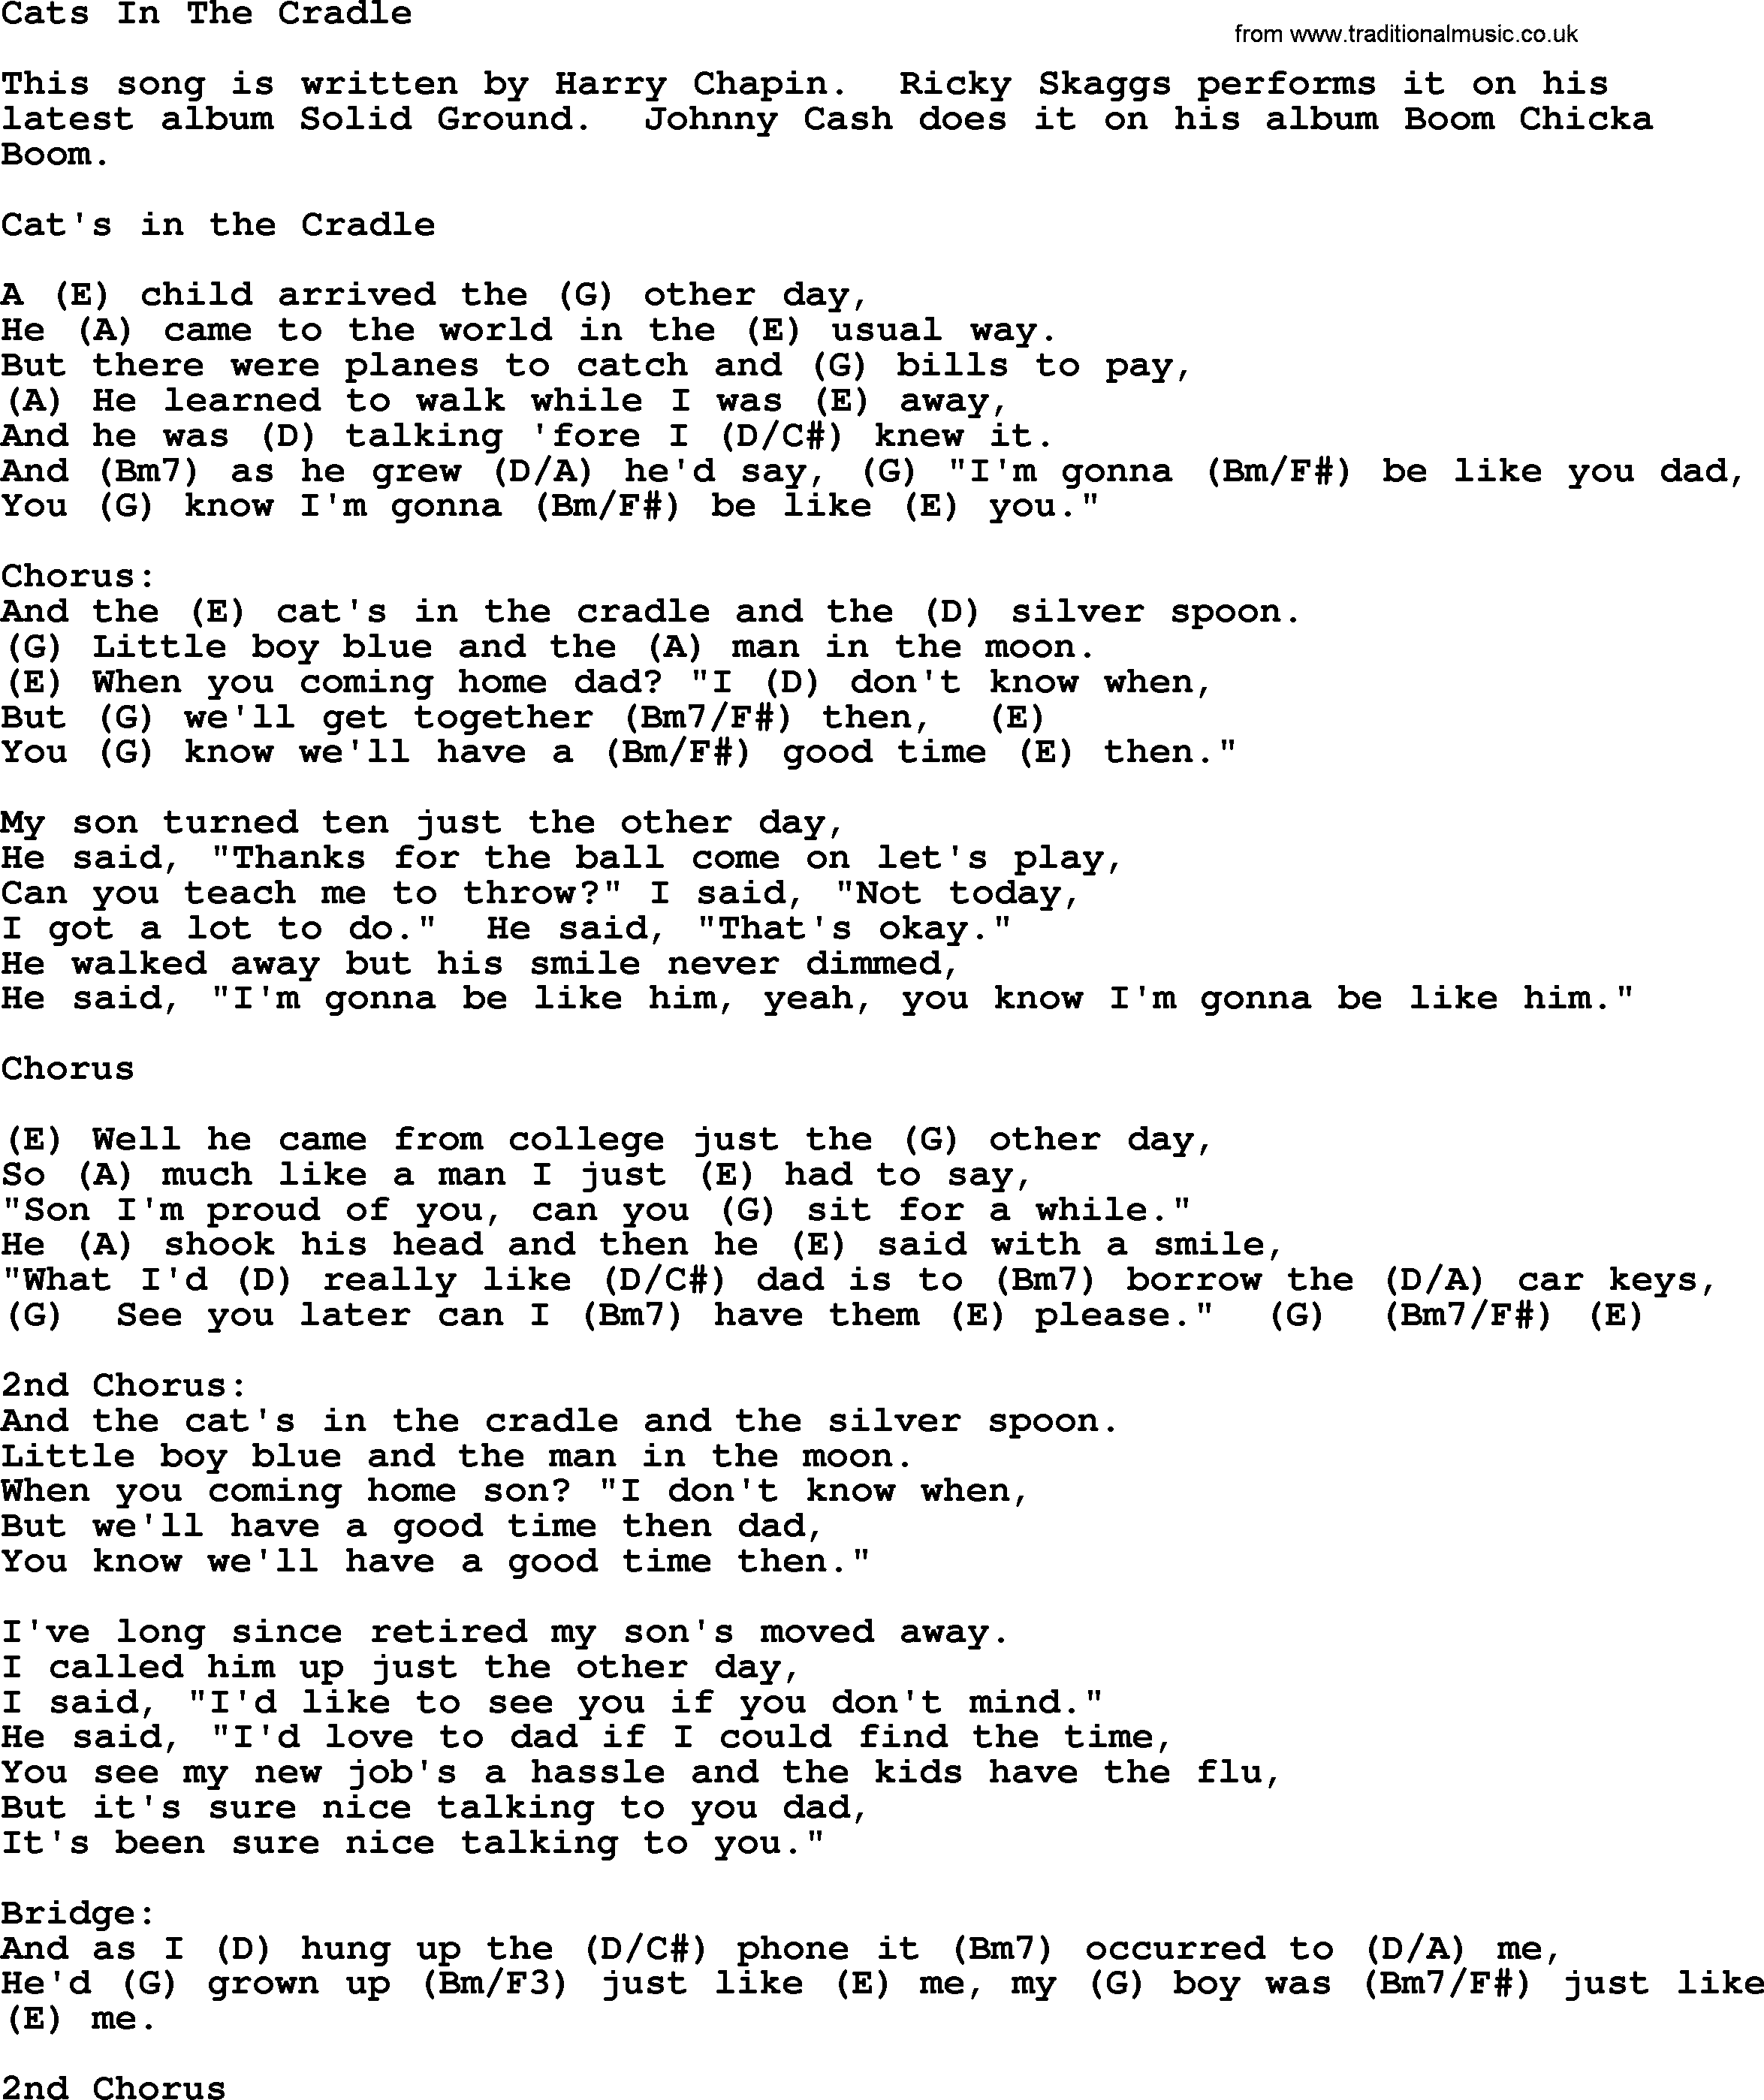 Bluegrass song: Cats In The Cradle, lyrics and chords